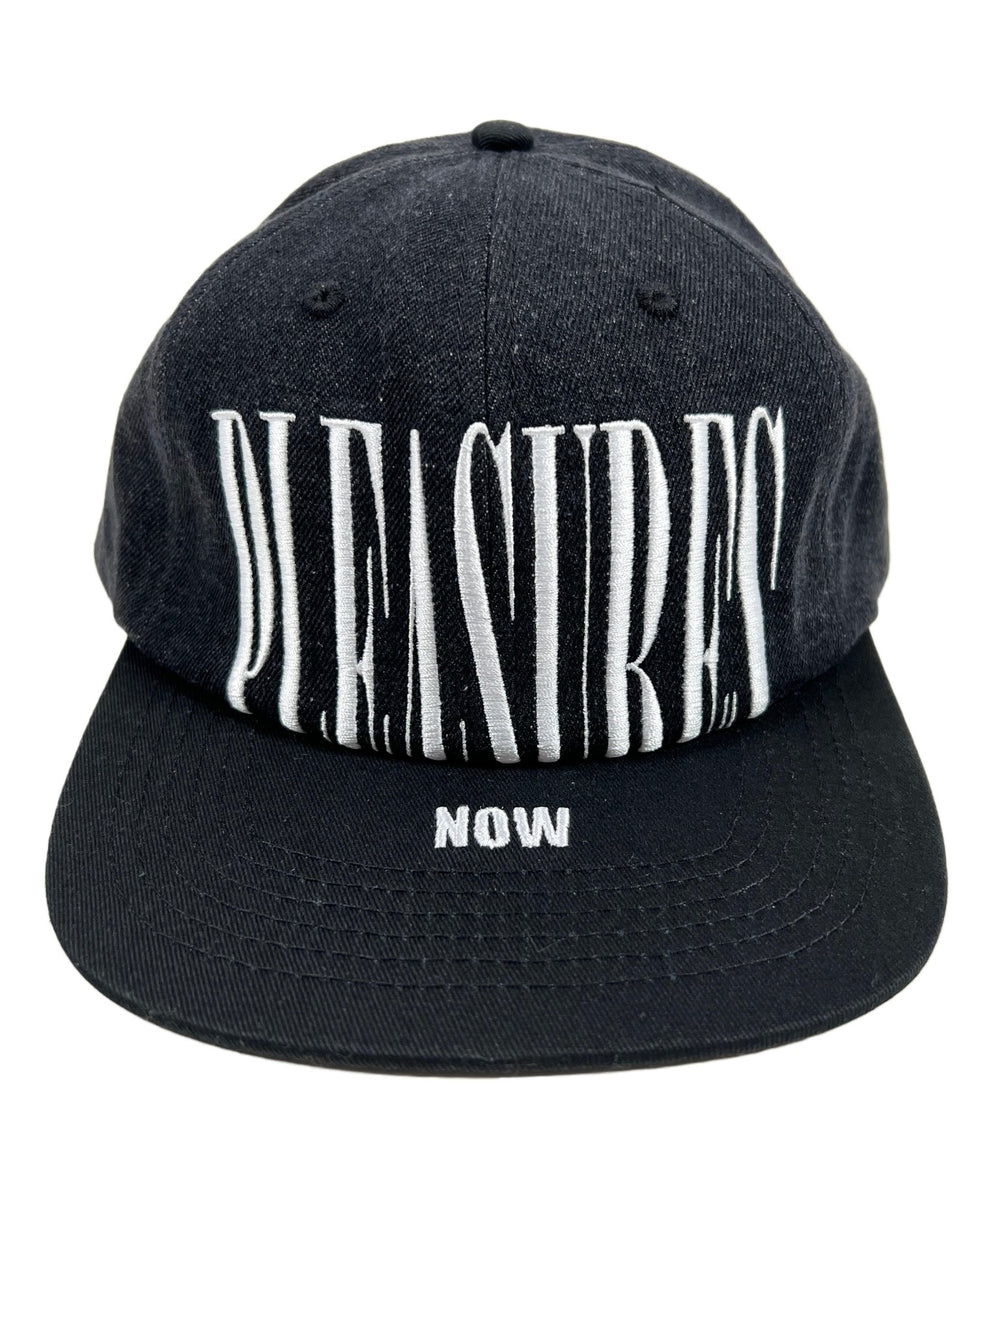 A PLEASURES denim ball cap with the word pleasures logo embroidered on it.